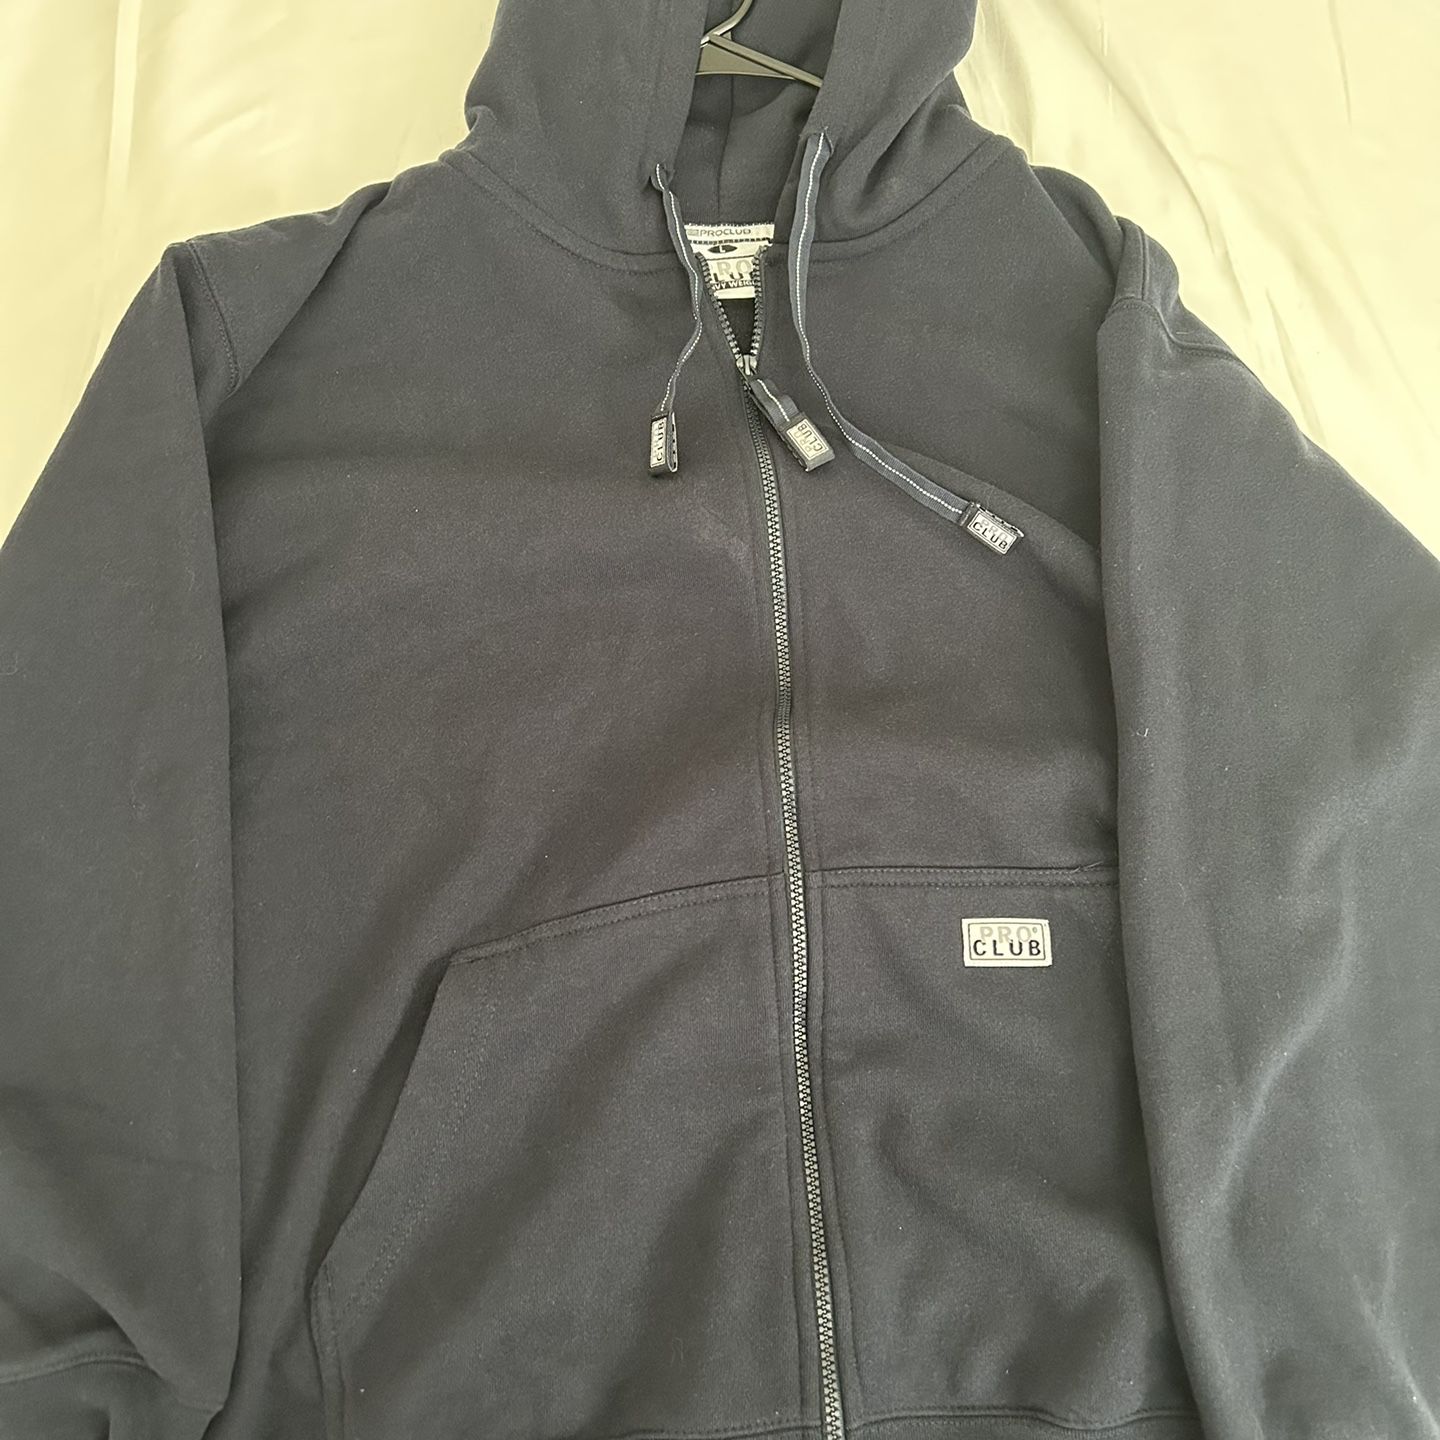 Navy Blue UCLA Hoodie for Sale in West Covina, CA - OfferUp